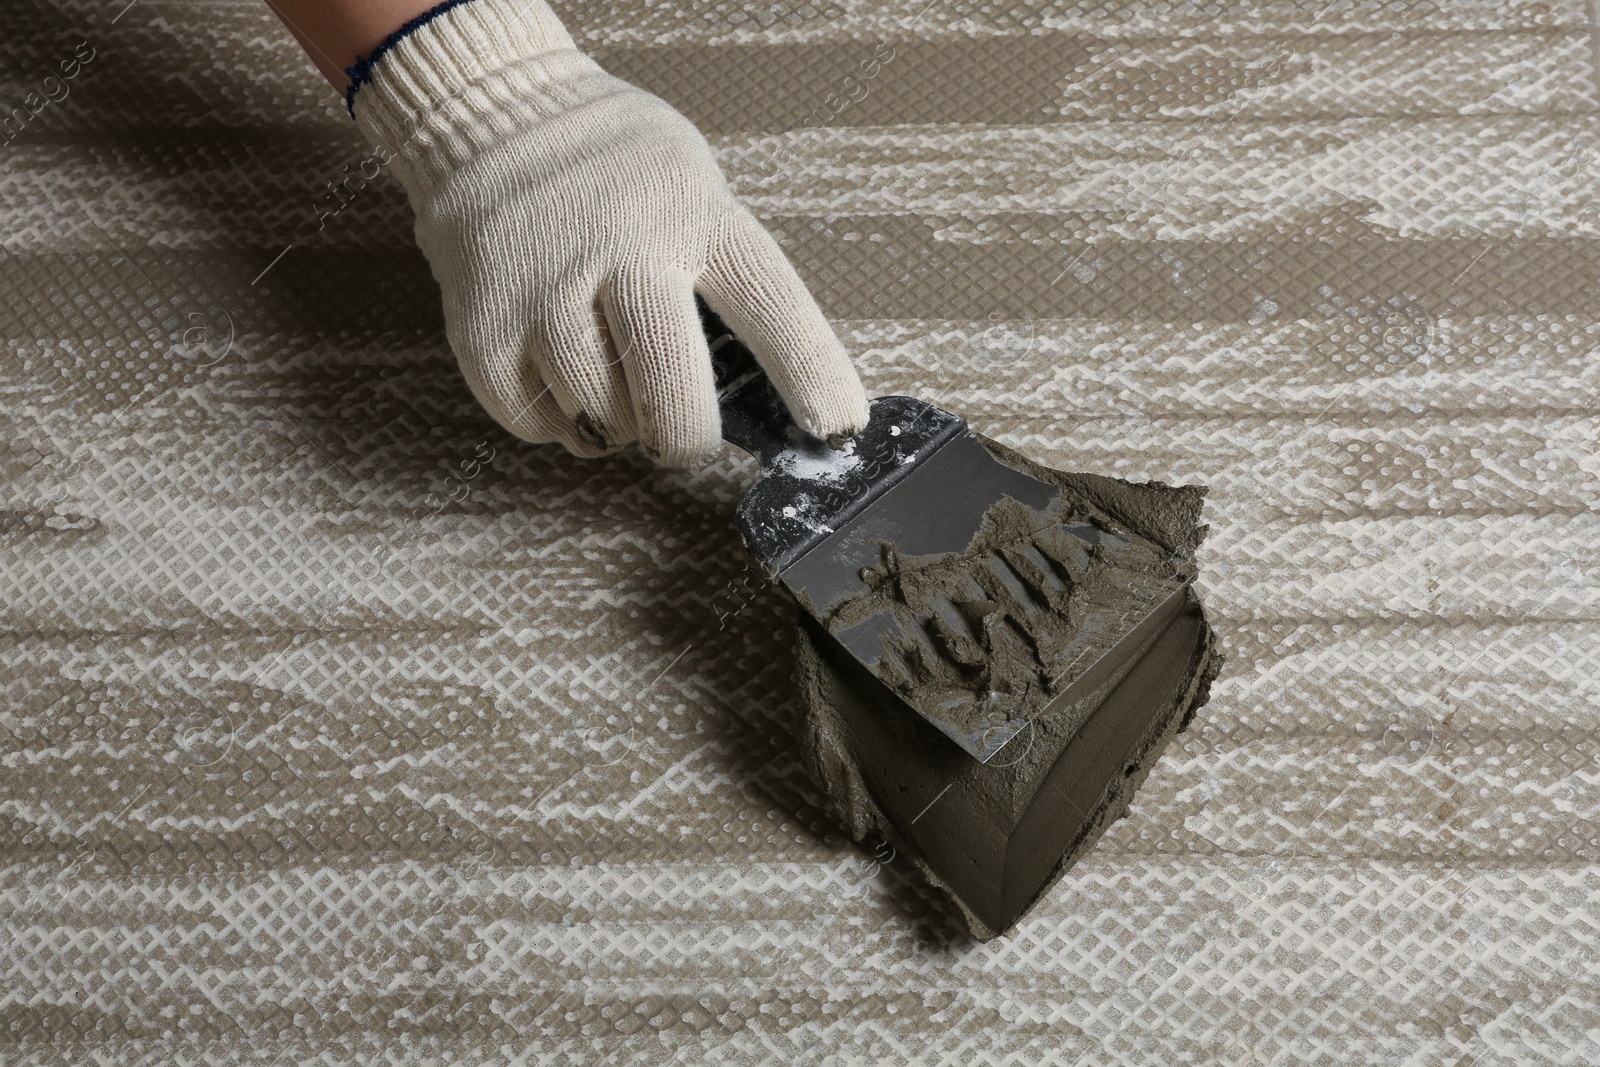 Photo of Worker spreading concrete on ceramic tile with spatula, closeup